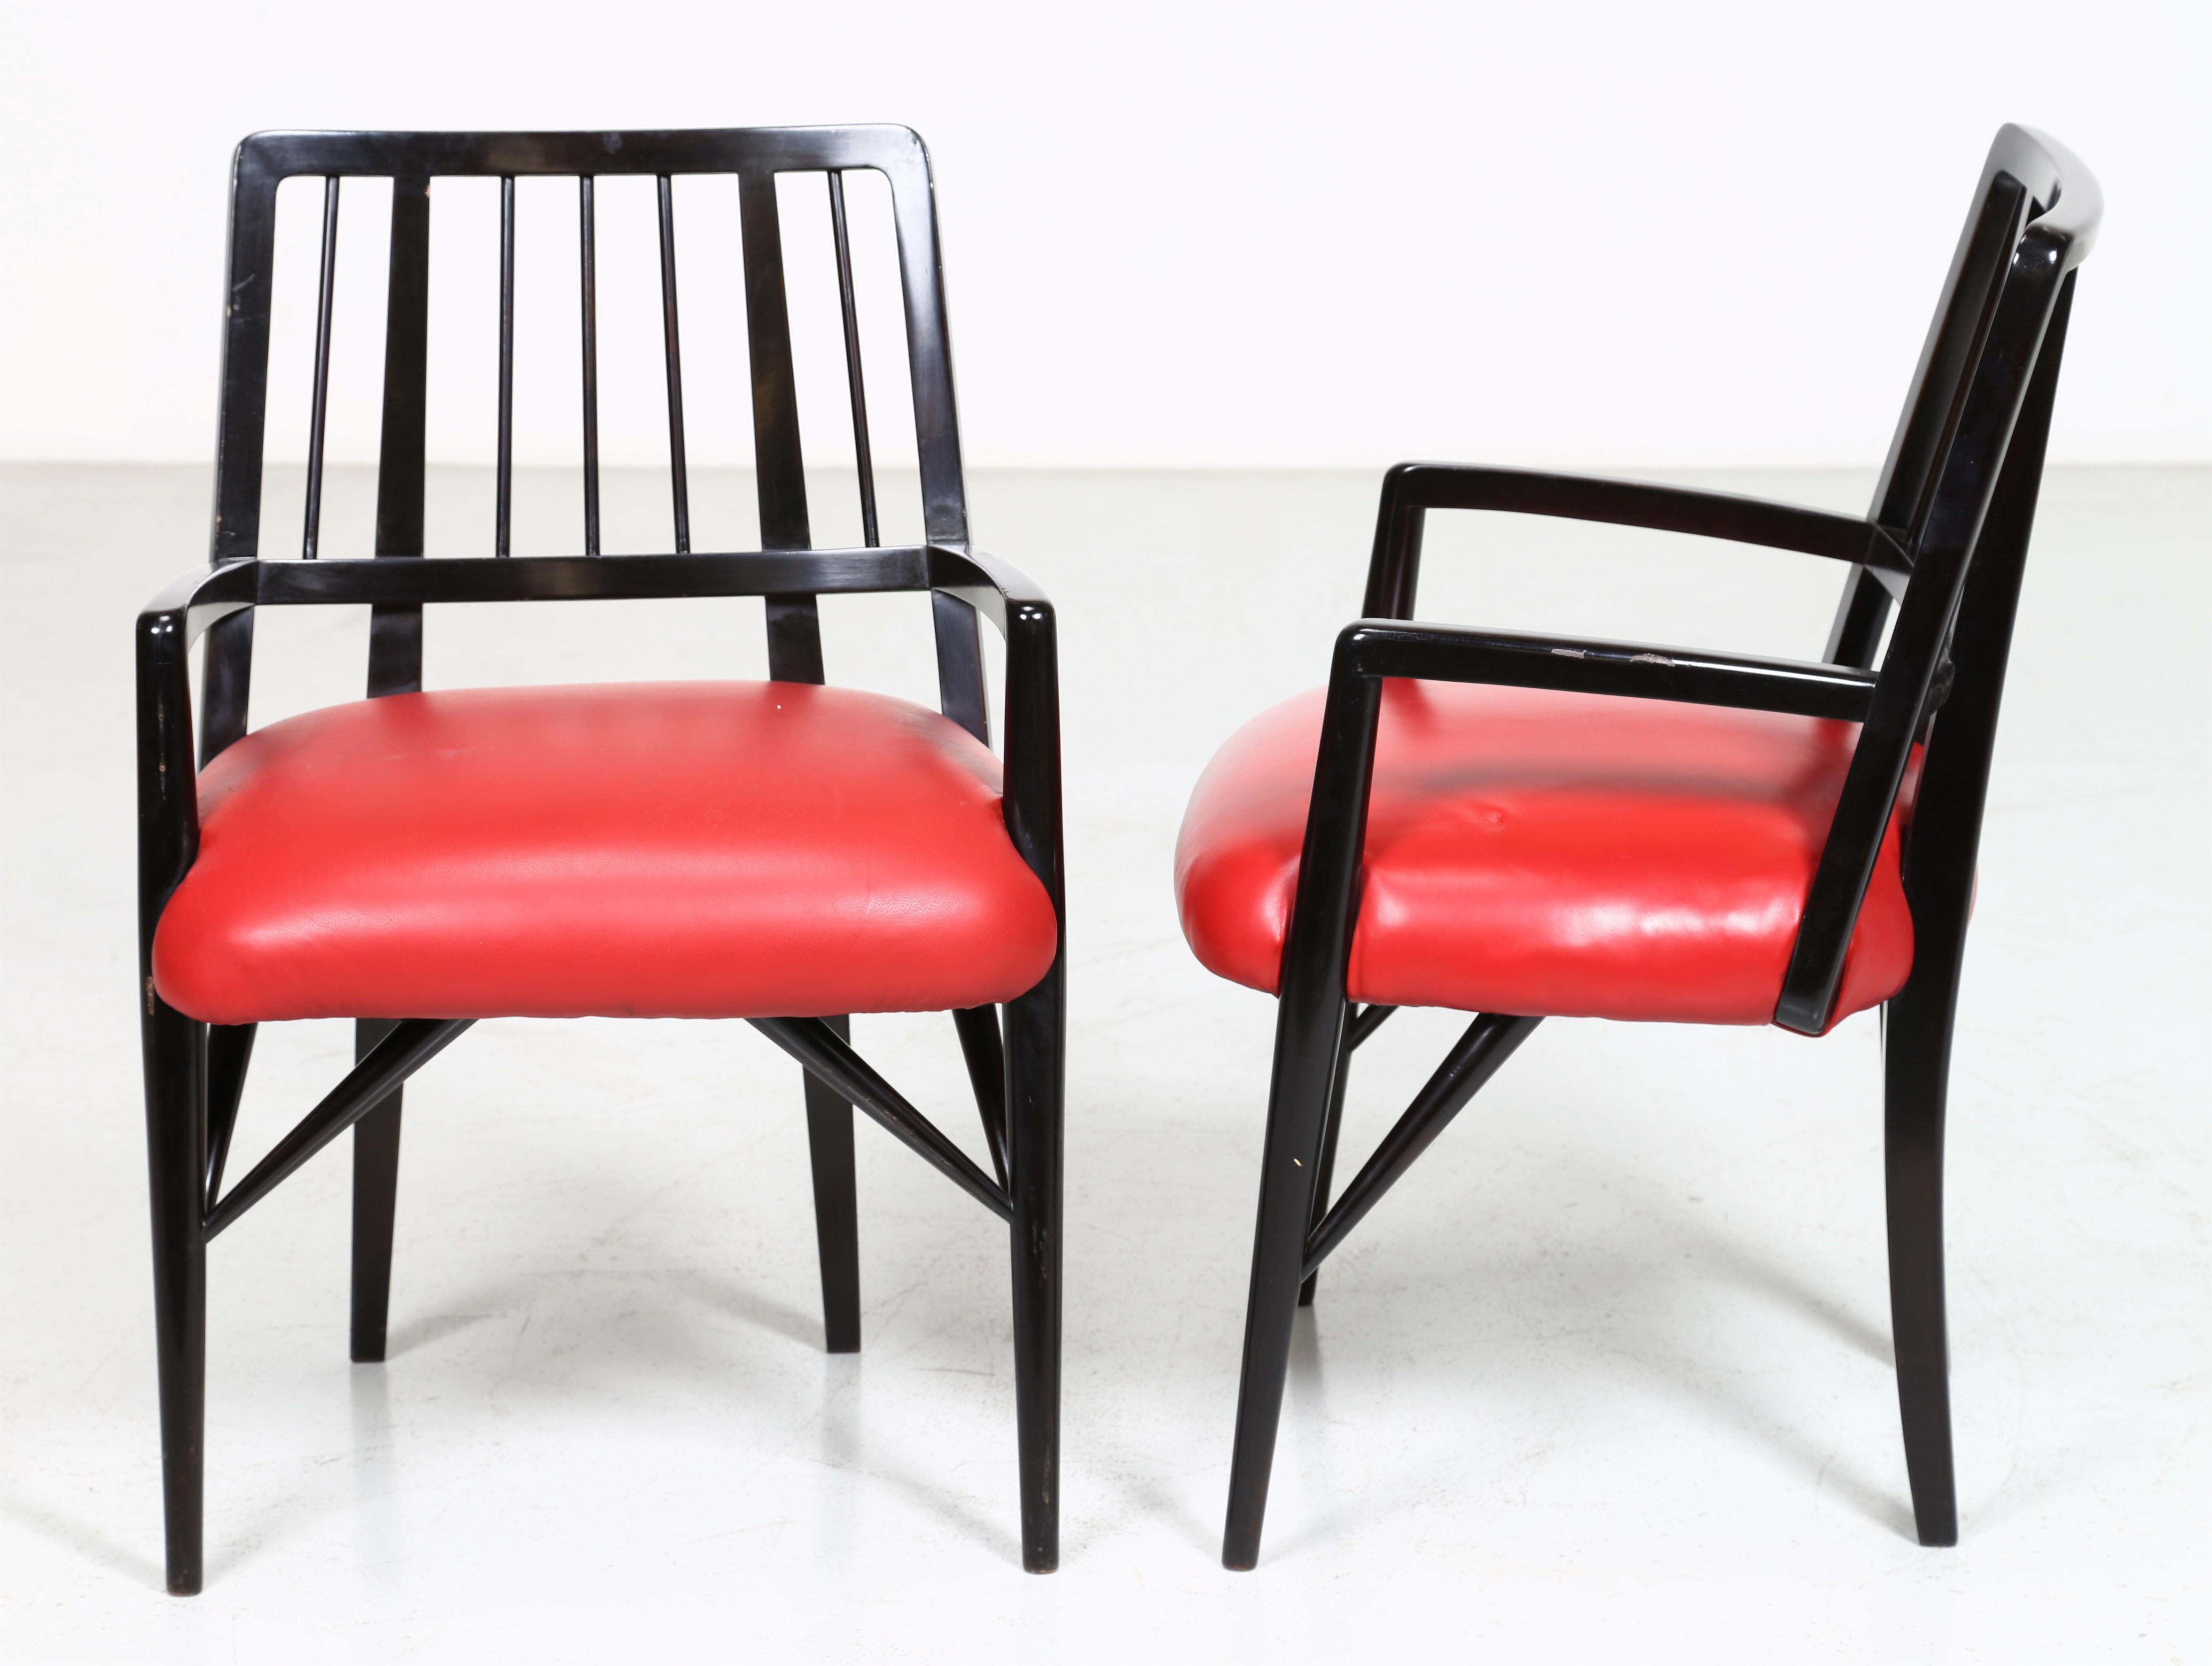 Paul Laszlo Set of Four Chairs in Black Lacquered Wood, 1950s For Sale 8